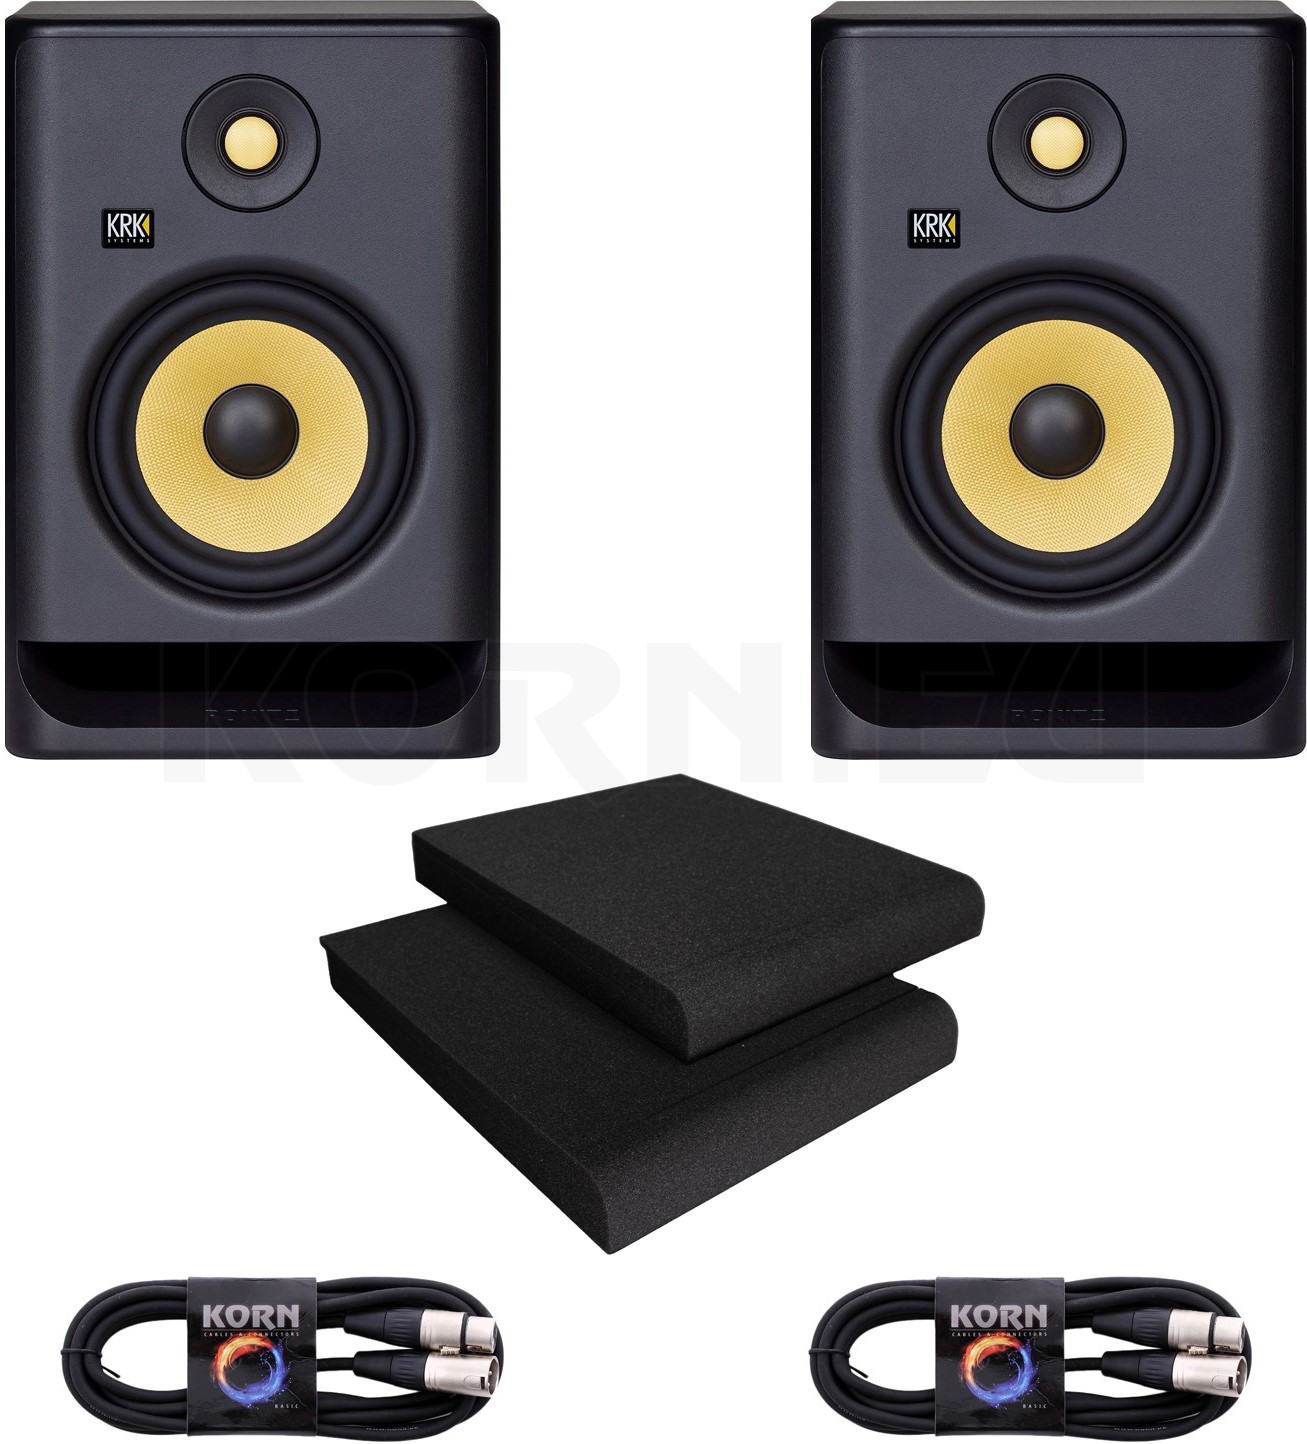 KRK KRK Rokit RP7 G4 Active DJ Studio Monitor Speakers with Isolation Pads & Cable 